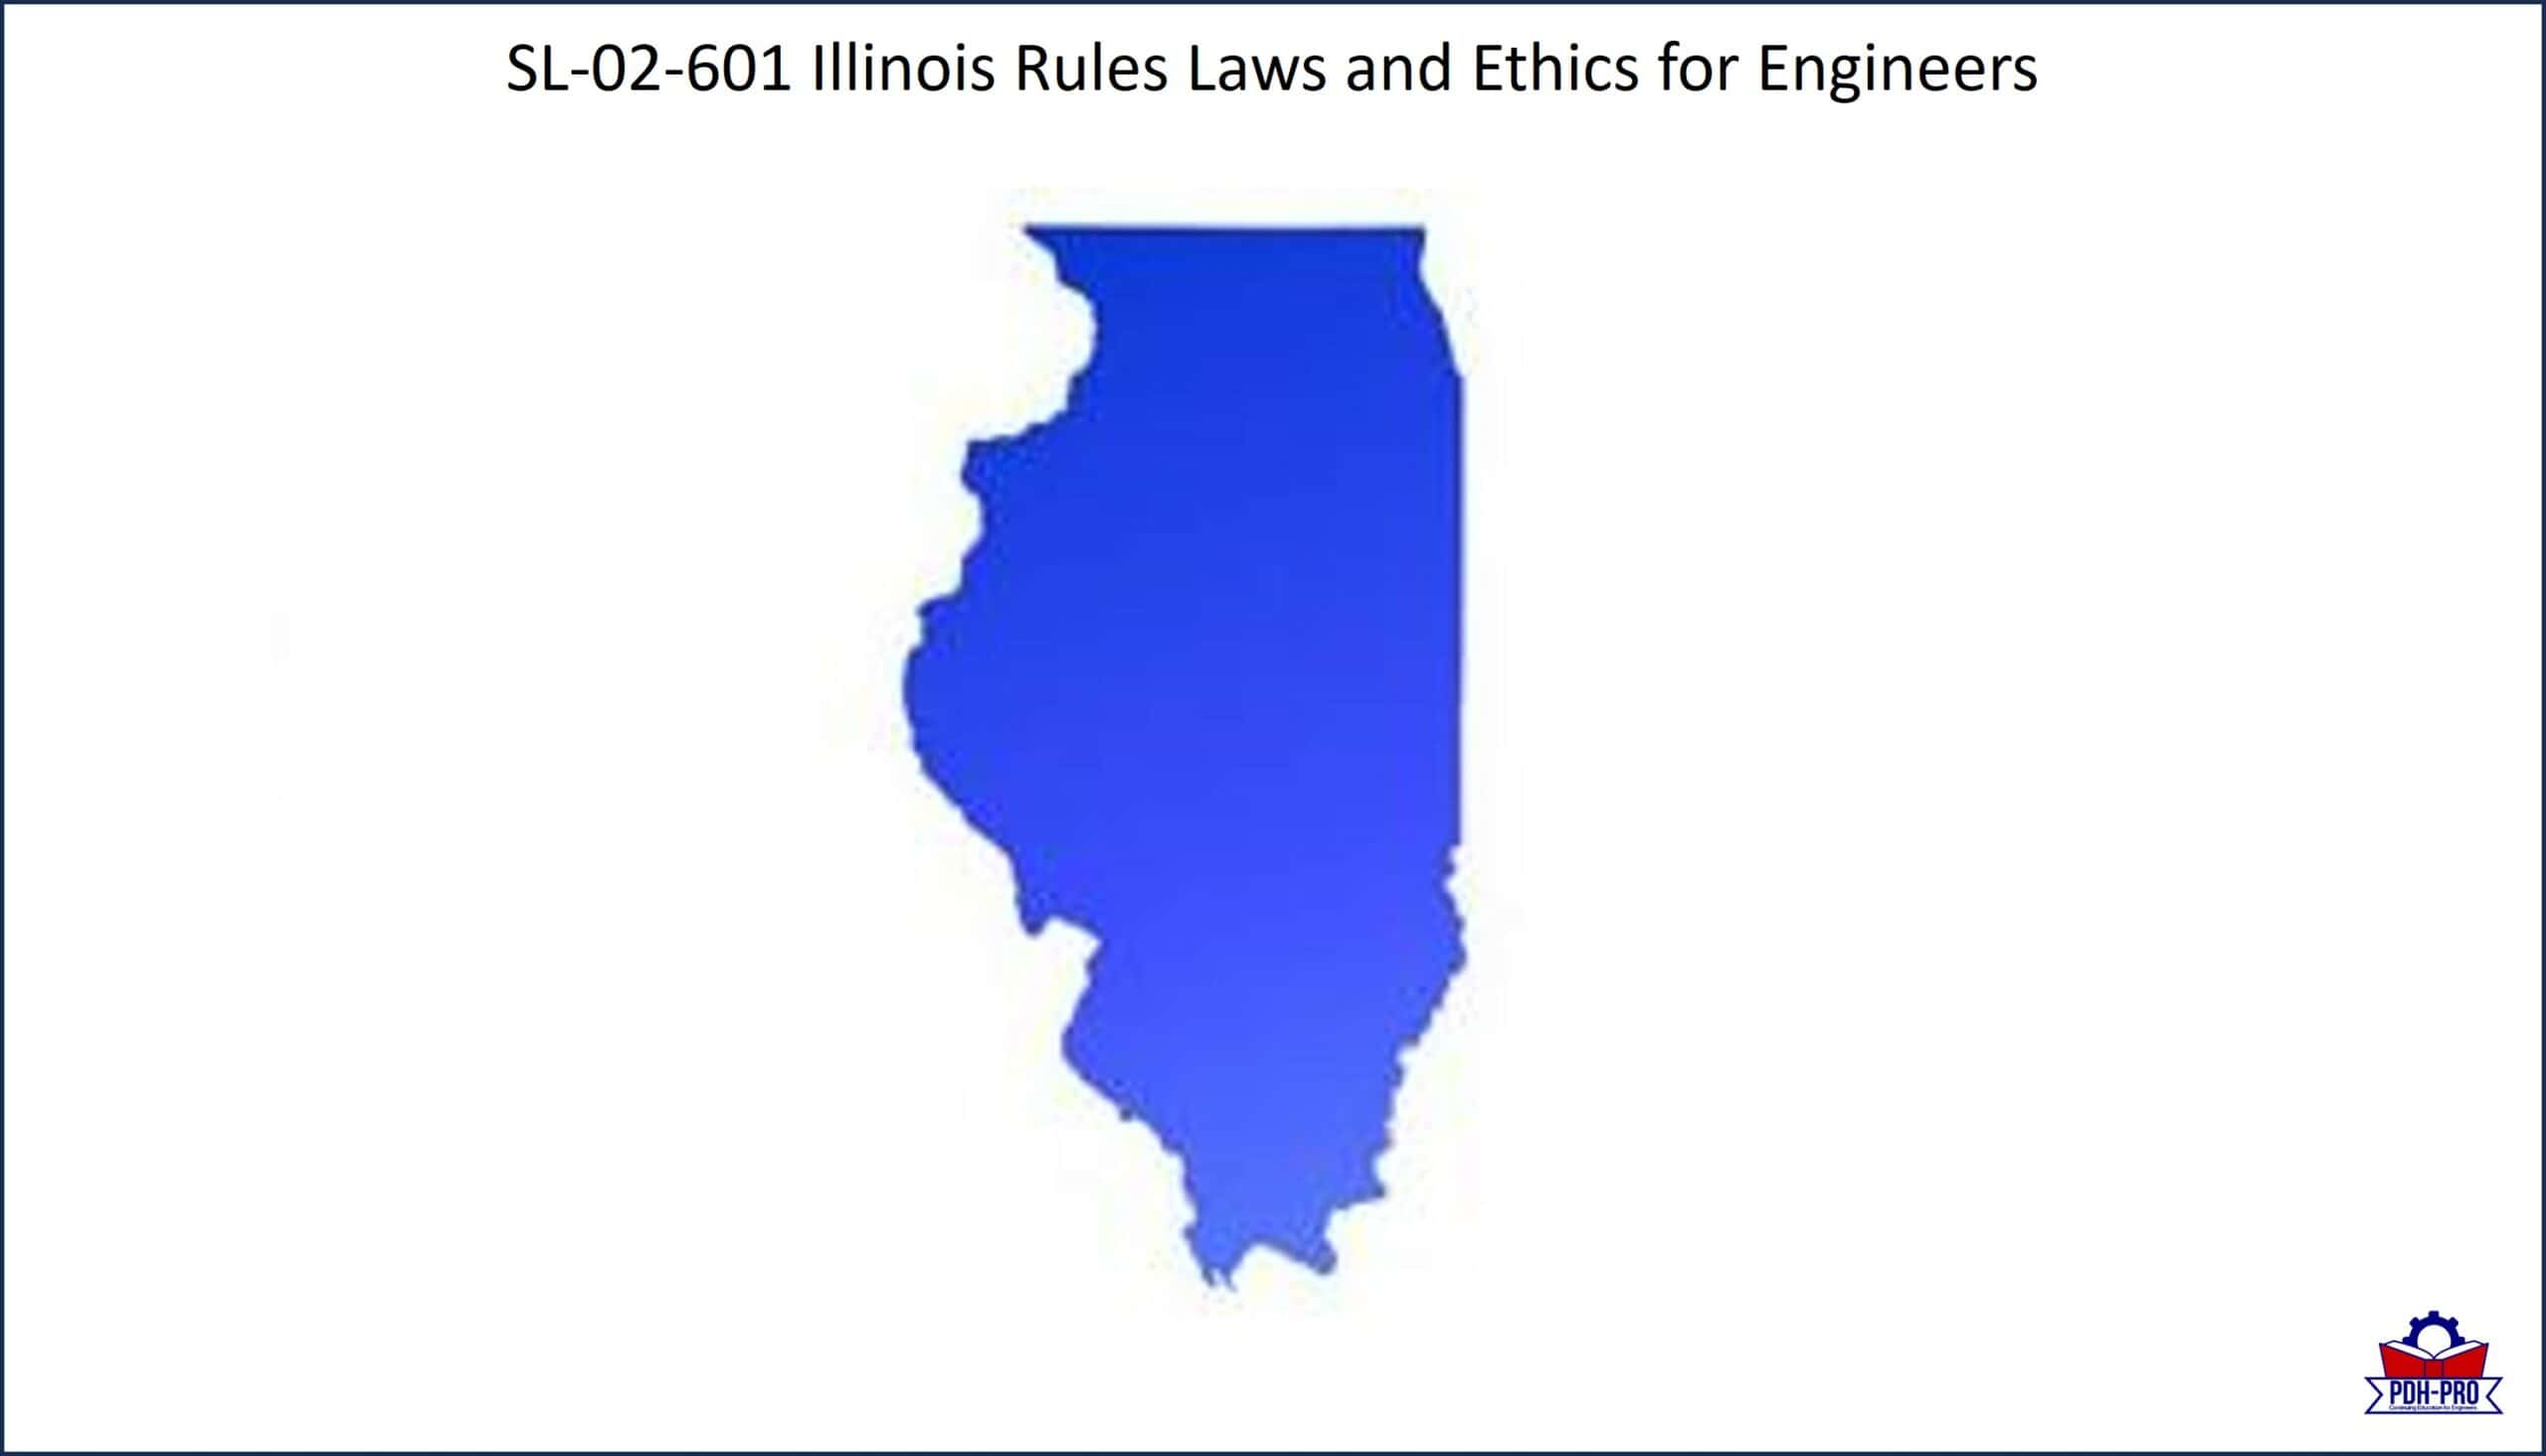 Illinois Rules Laws and Ethics for Engineers